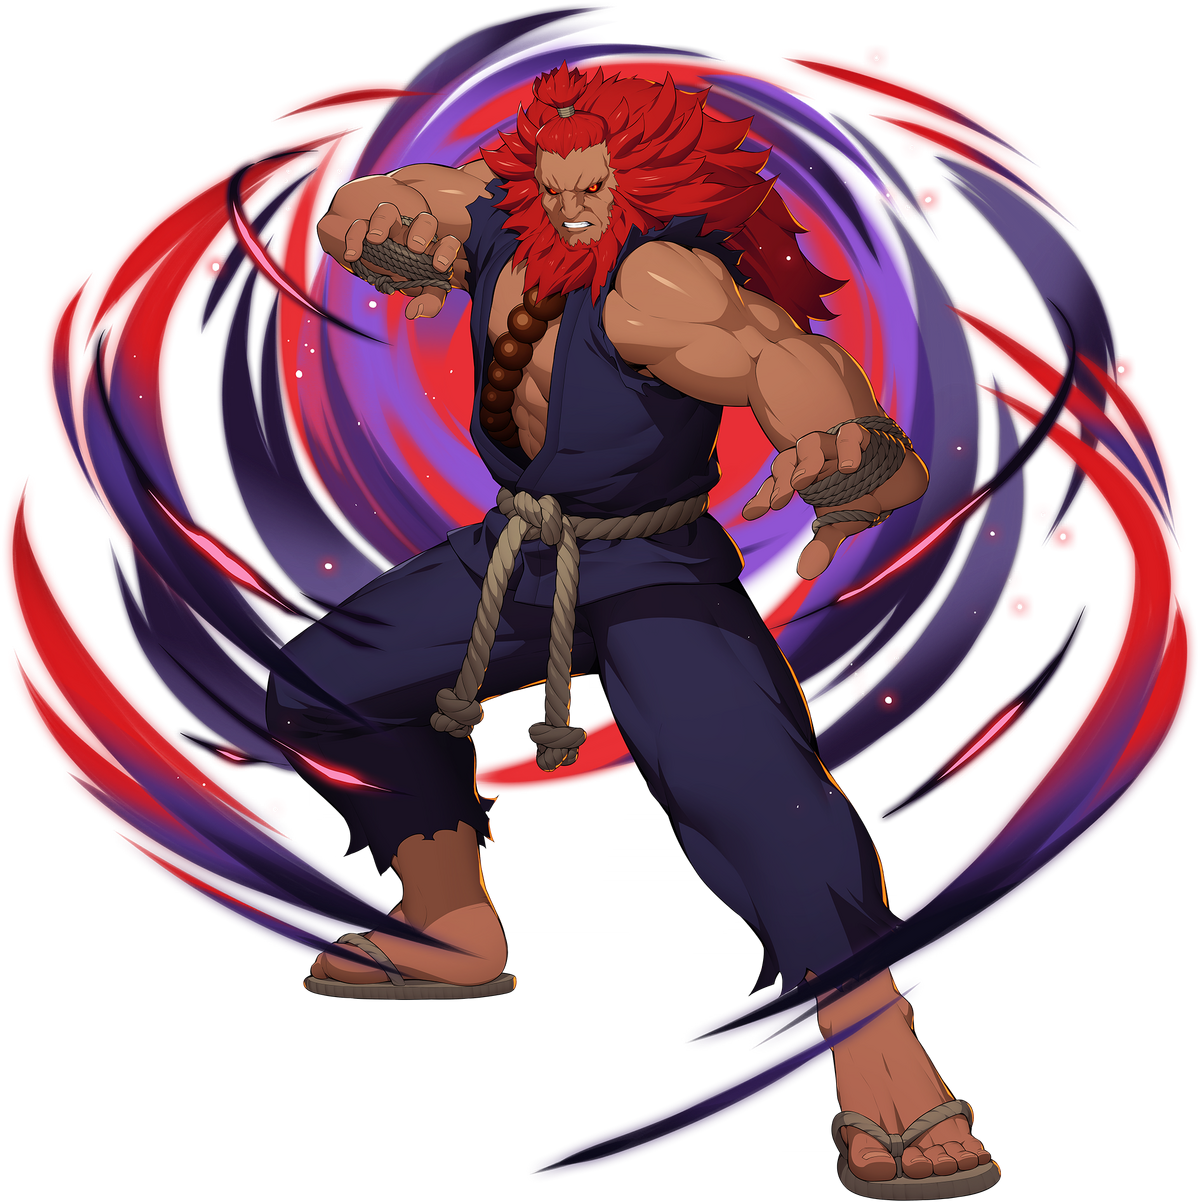 AKUMA IS OFFICIALY ANNOUNCED!!! AKUMA BANNER DETAILS! DO THIS FOR